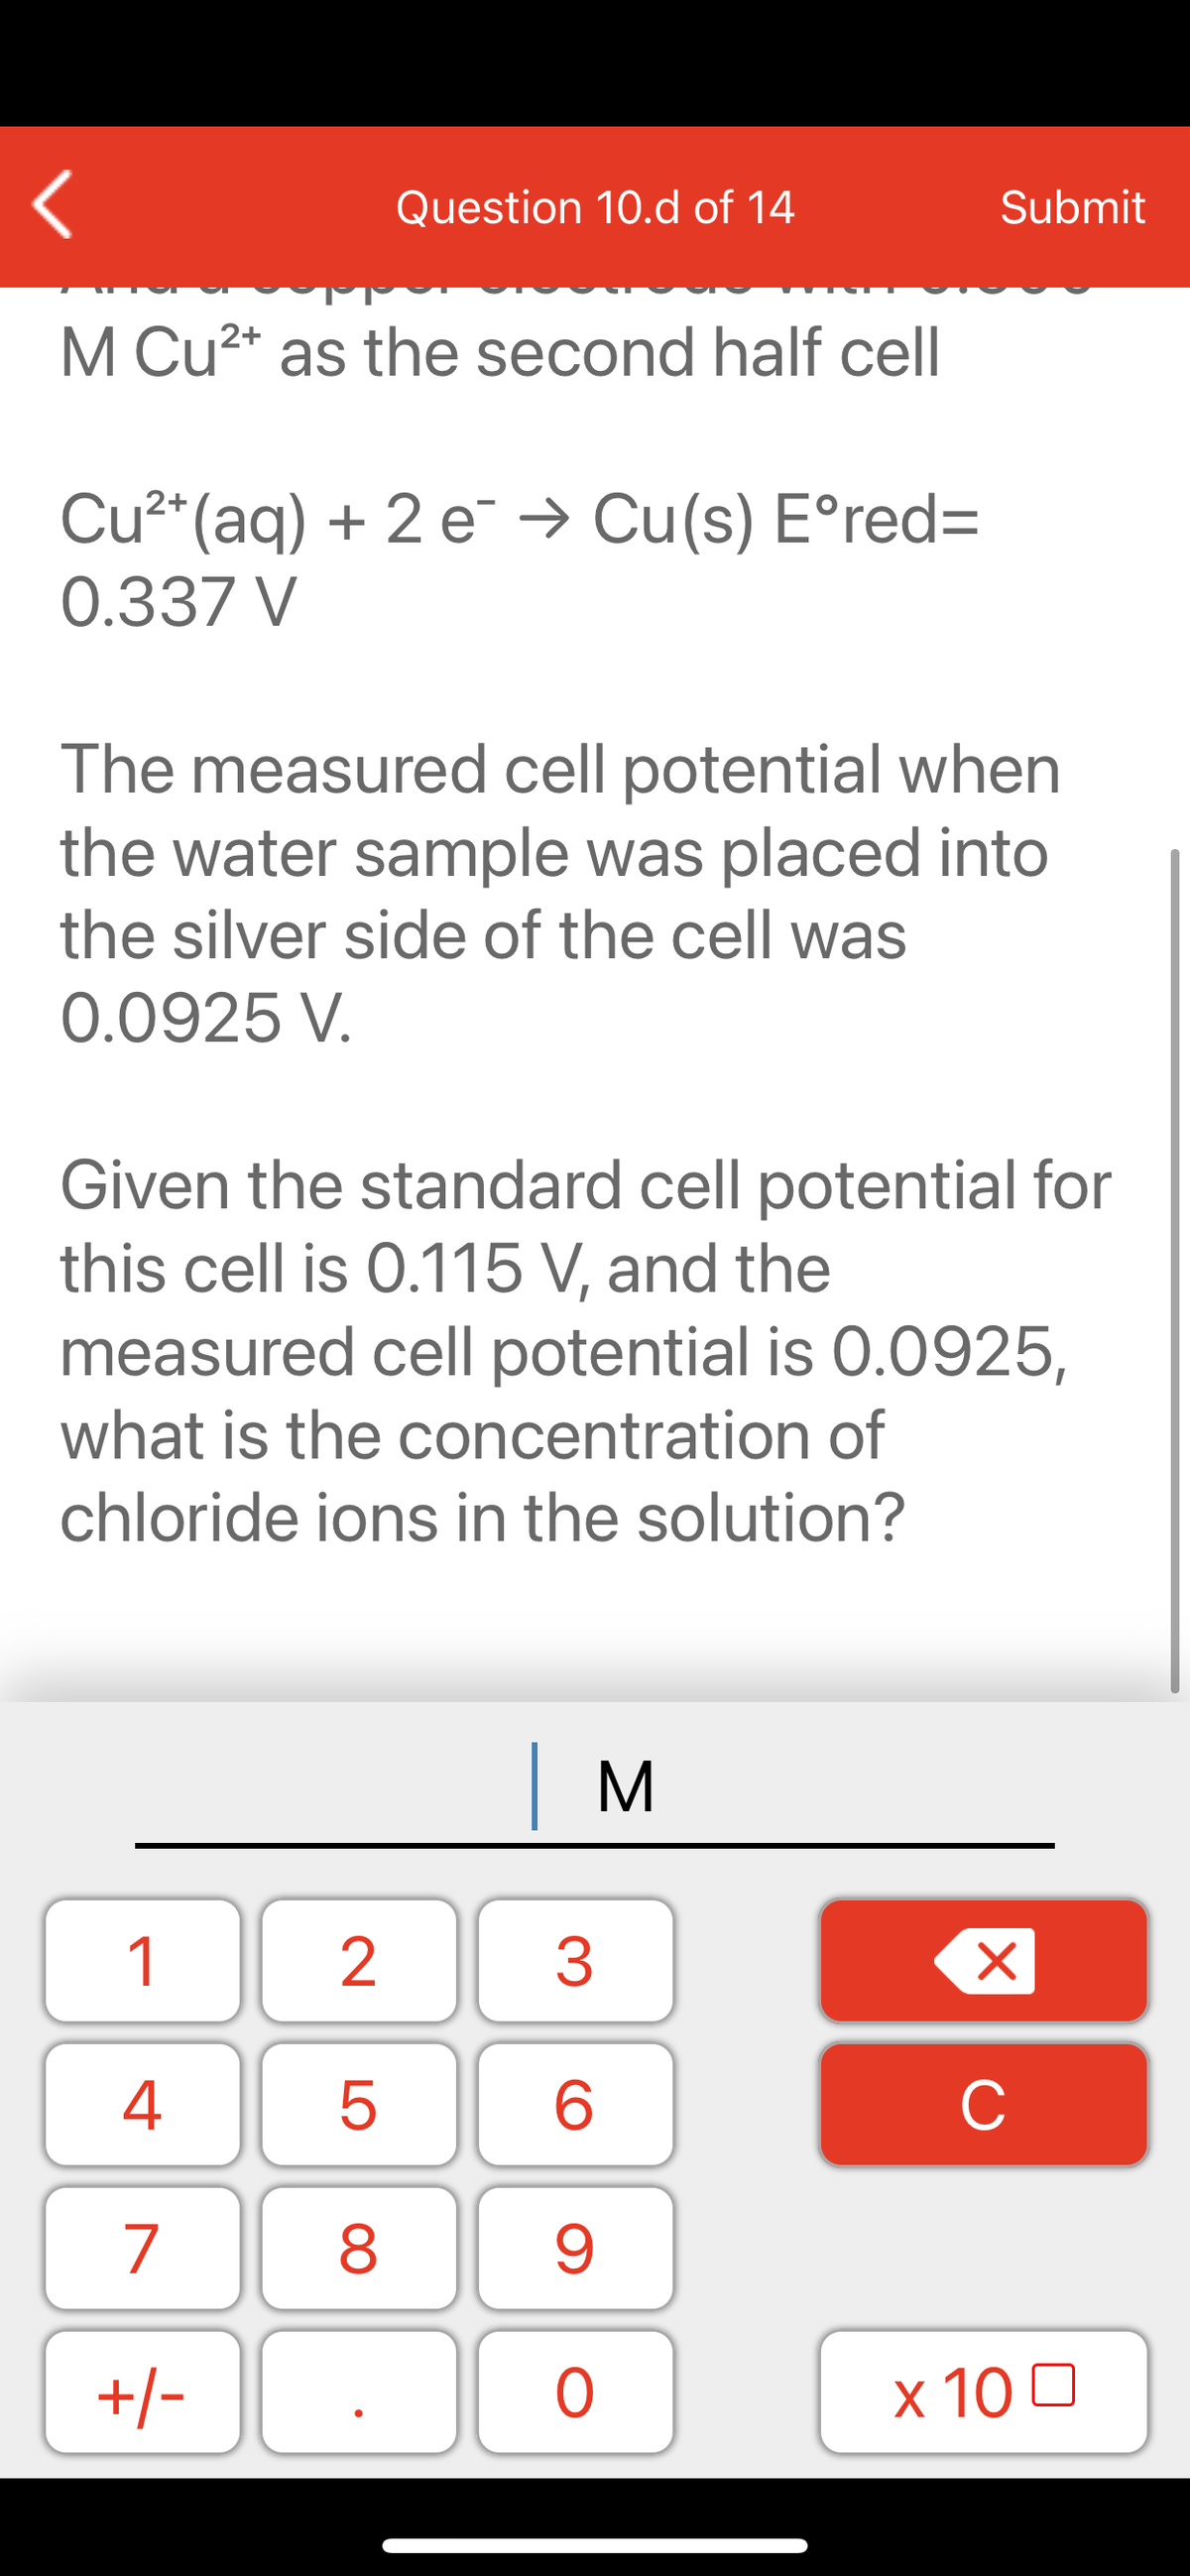 Question 10.d of 14
Submit
M Cu2* as the second half cell
Cu²*(aq) + 2 e¯ → Cu(s) E°red=
0.337 V
The measured cell potential when
the water sample was placed into
the silver side of the cell was
0.0925 V.
Given the standard cell potential for
this cell is 0.115 V, and the
measured cell potential is 0.0925,
what is the concentration of
chloride ions in the solution?
| M
1
2
3
C
7
9.
+/-
x 10 0
LO
00
